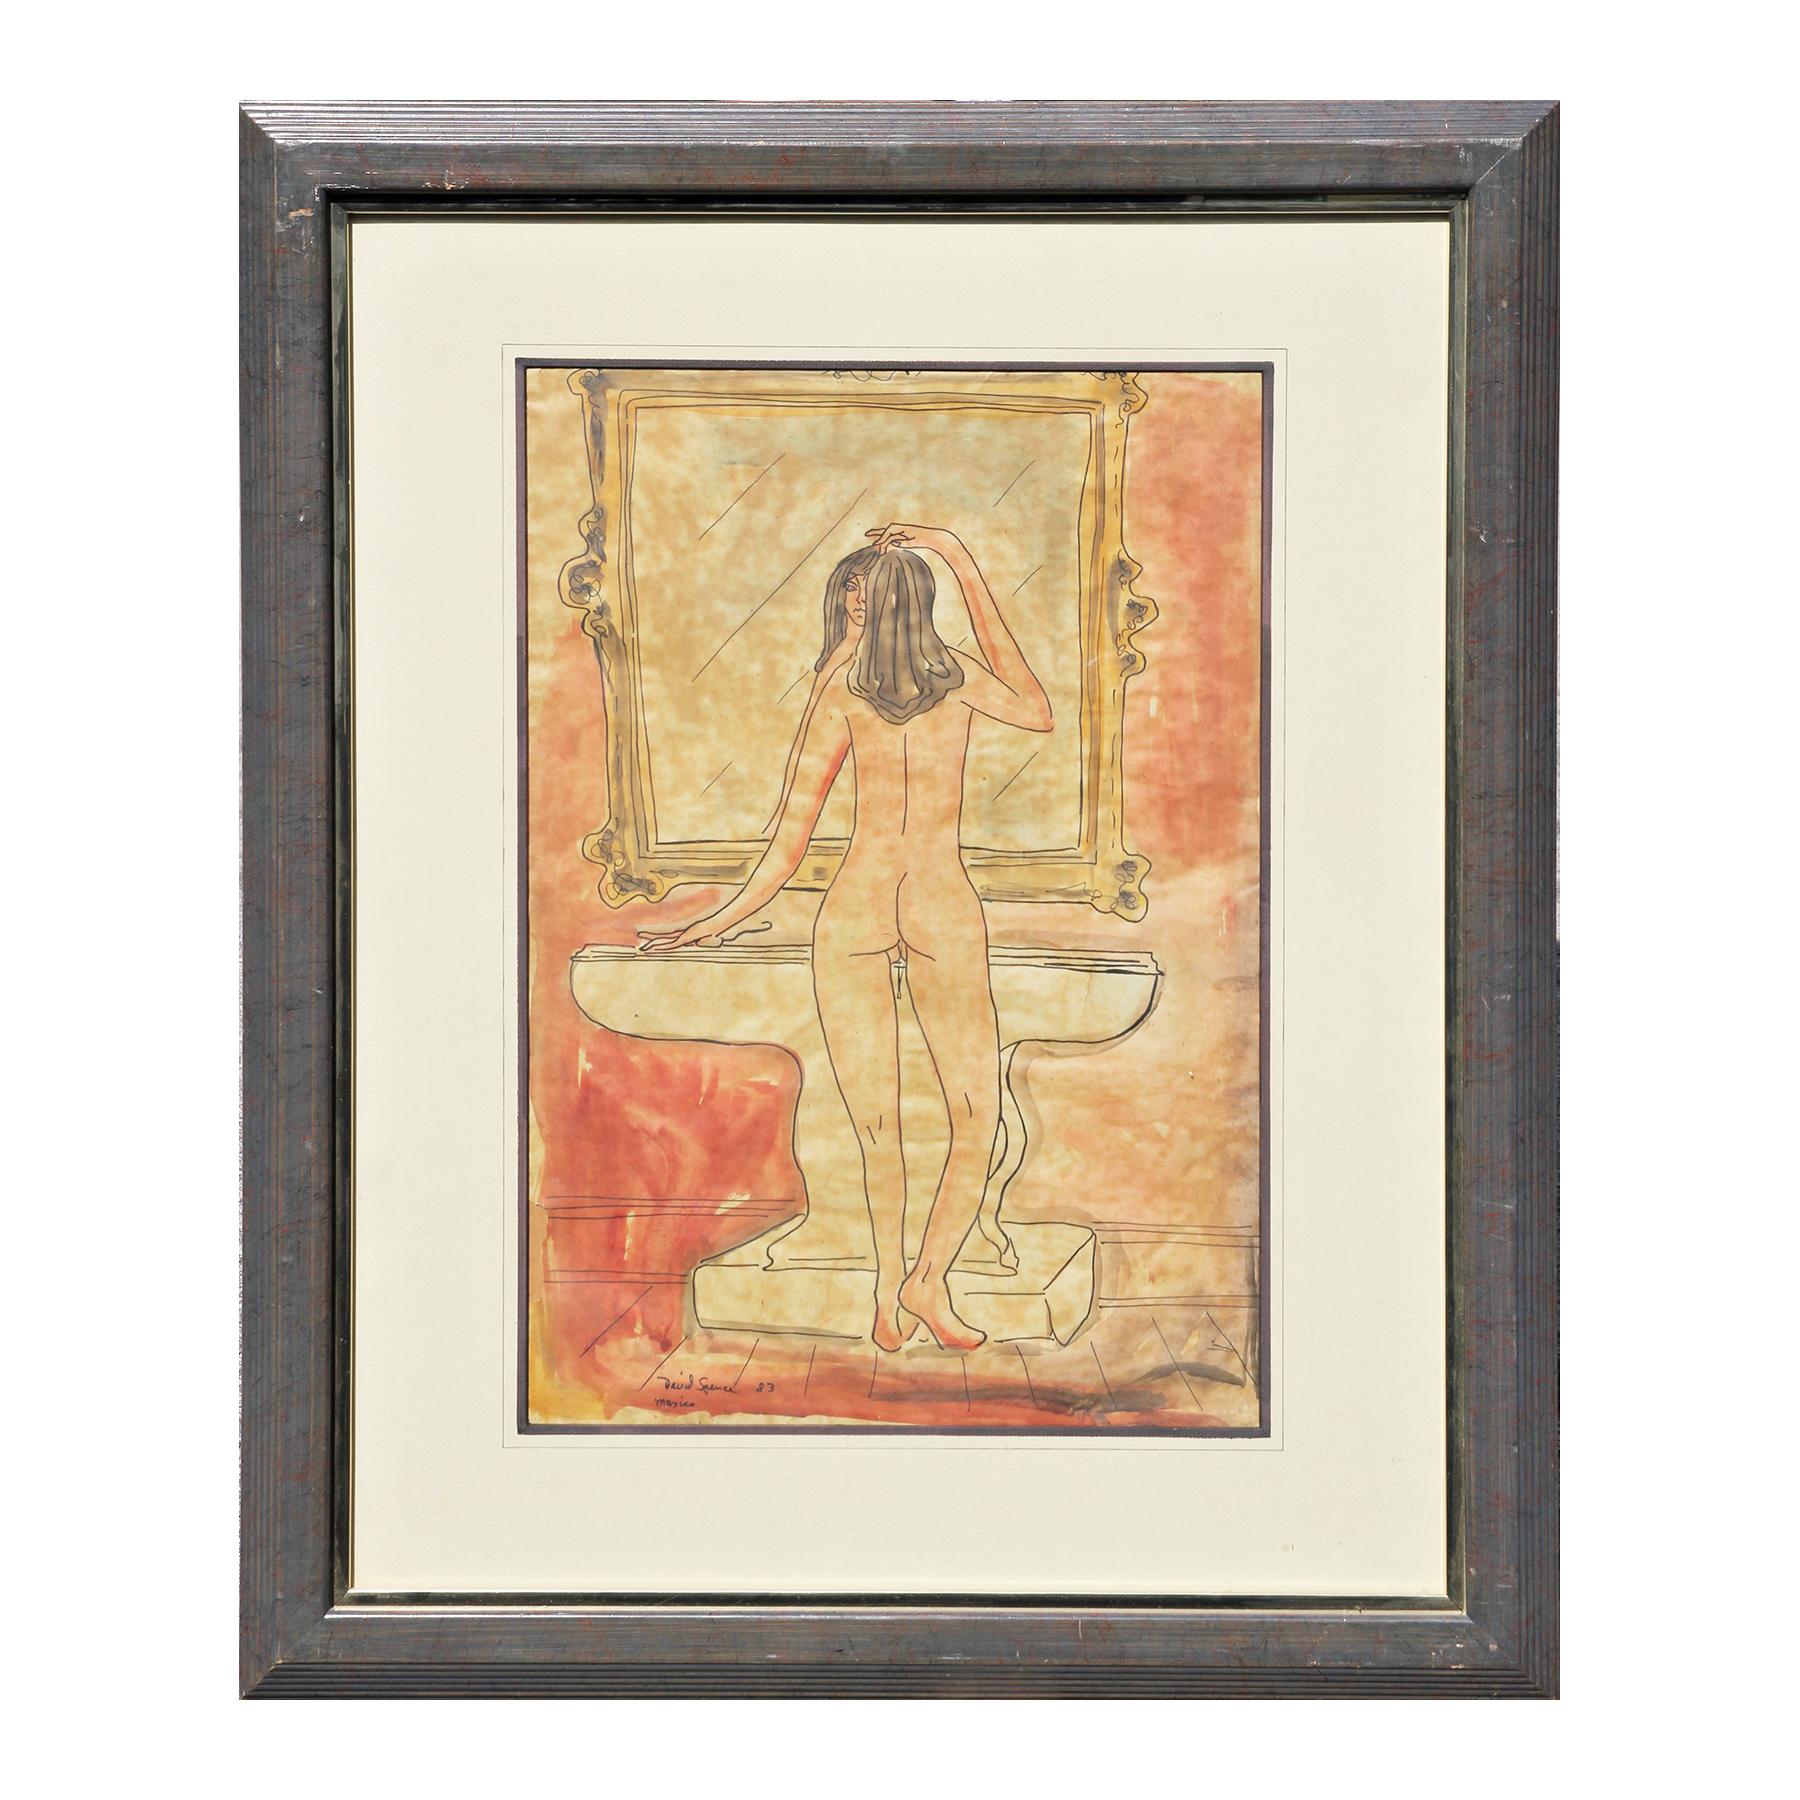 David Spence Figurative Art - Orange Toned Modern Abstract Nude Female Bather Watercolor Painting